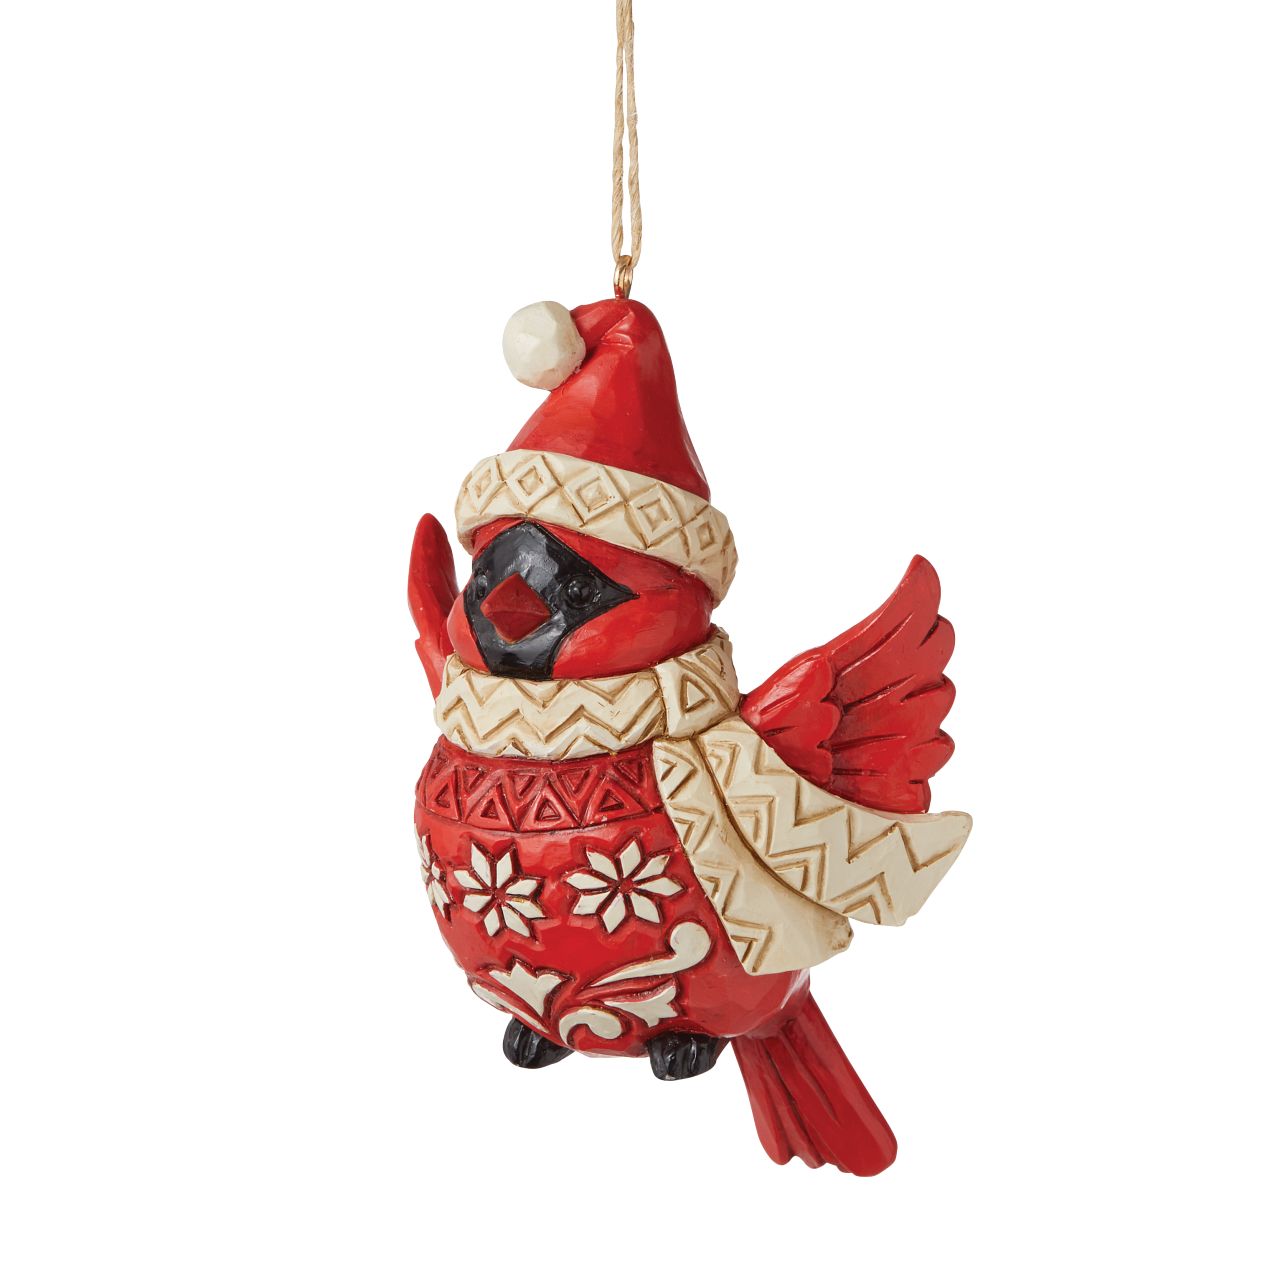 Nordic Noel Cardinal Christmas Hanging Ornament  Tweet your heart out alongside this cheery cardinal ornament. Wearing a patterned Santa hat and matching scarf, this charismatic cutie seems to flutter between your tree's branches with holiday excitement. With folksy patterned plumage, he soars.